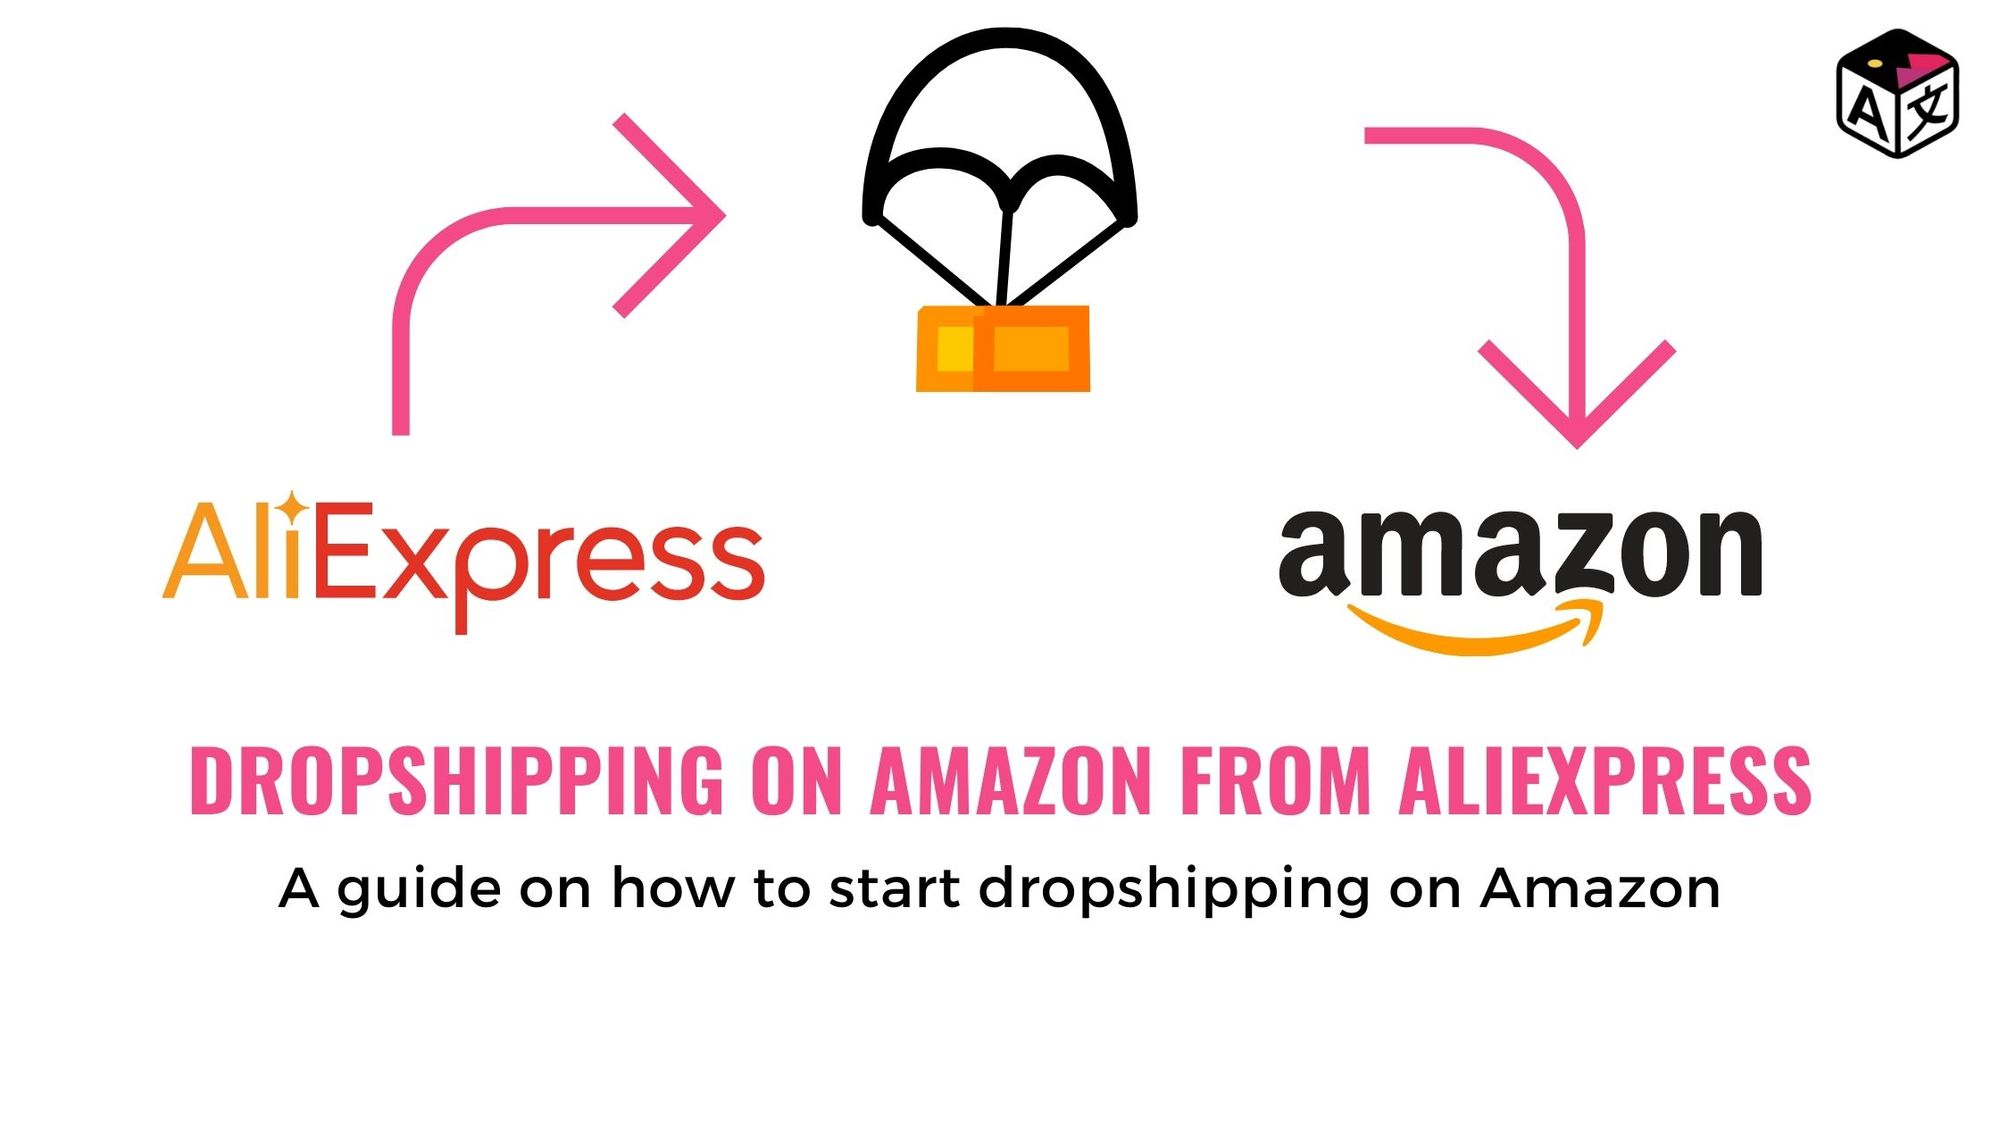 How to: Dropshipping from AliExpress to Amazon | Dropshipping on Amazon from Aliexpress